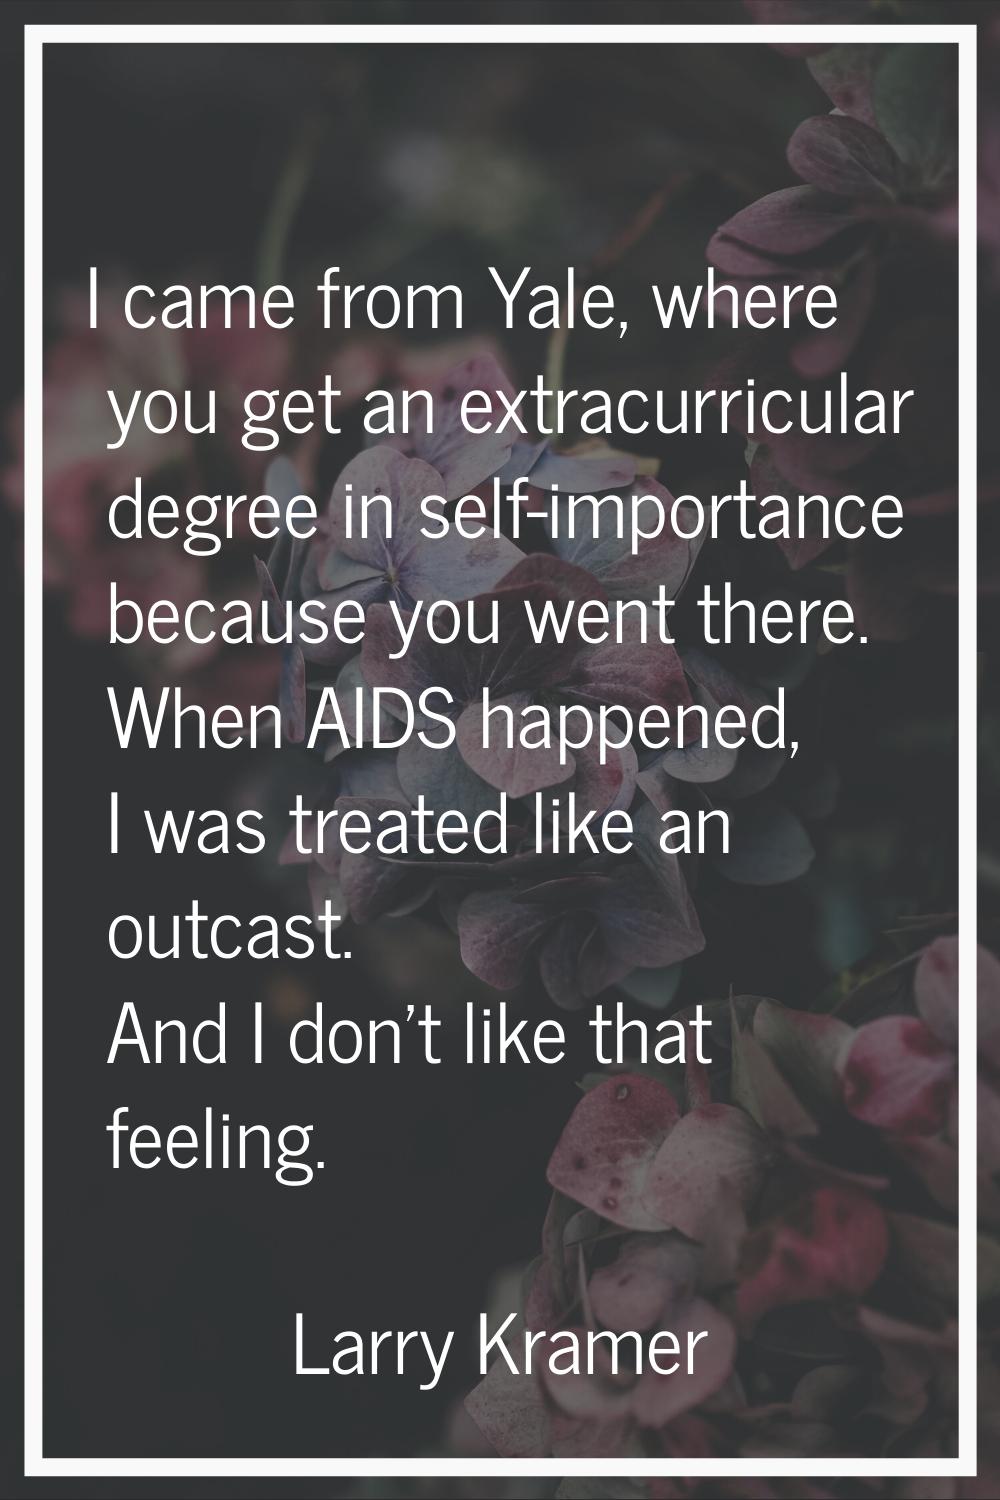 I came from Yale, where you get an extracurricular degree in self-importance because you went there